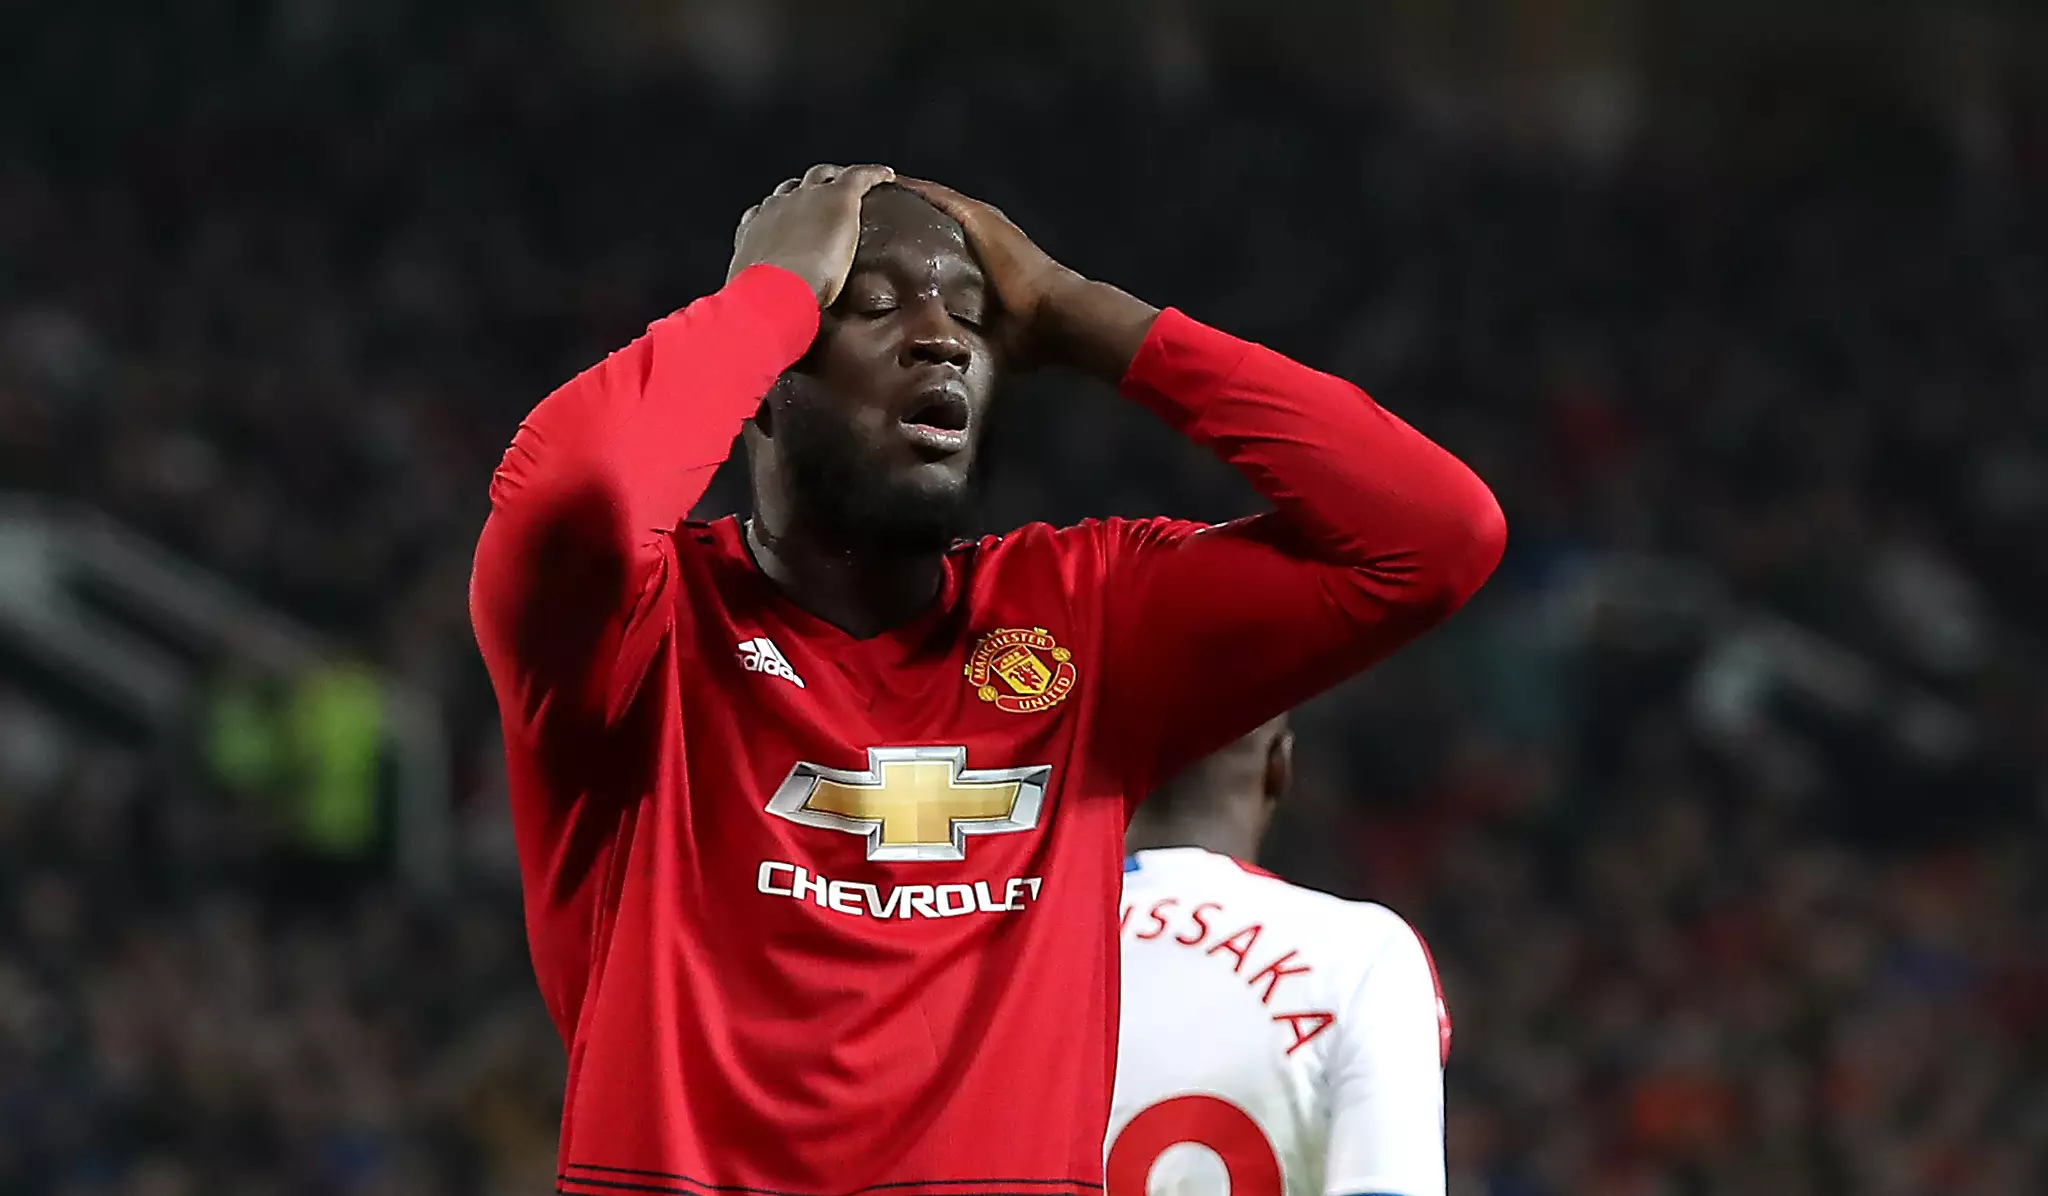 Lukaku had another frustrating day yesterday. Image: PA Images